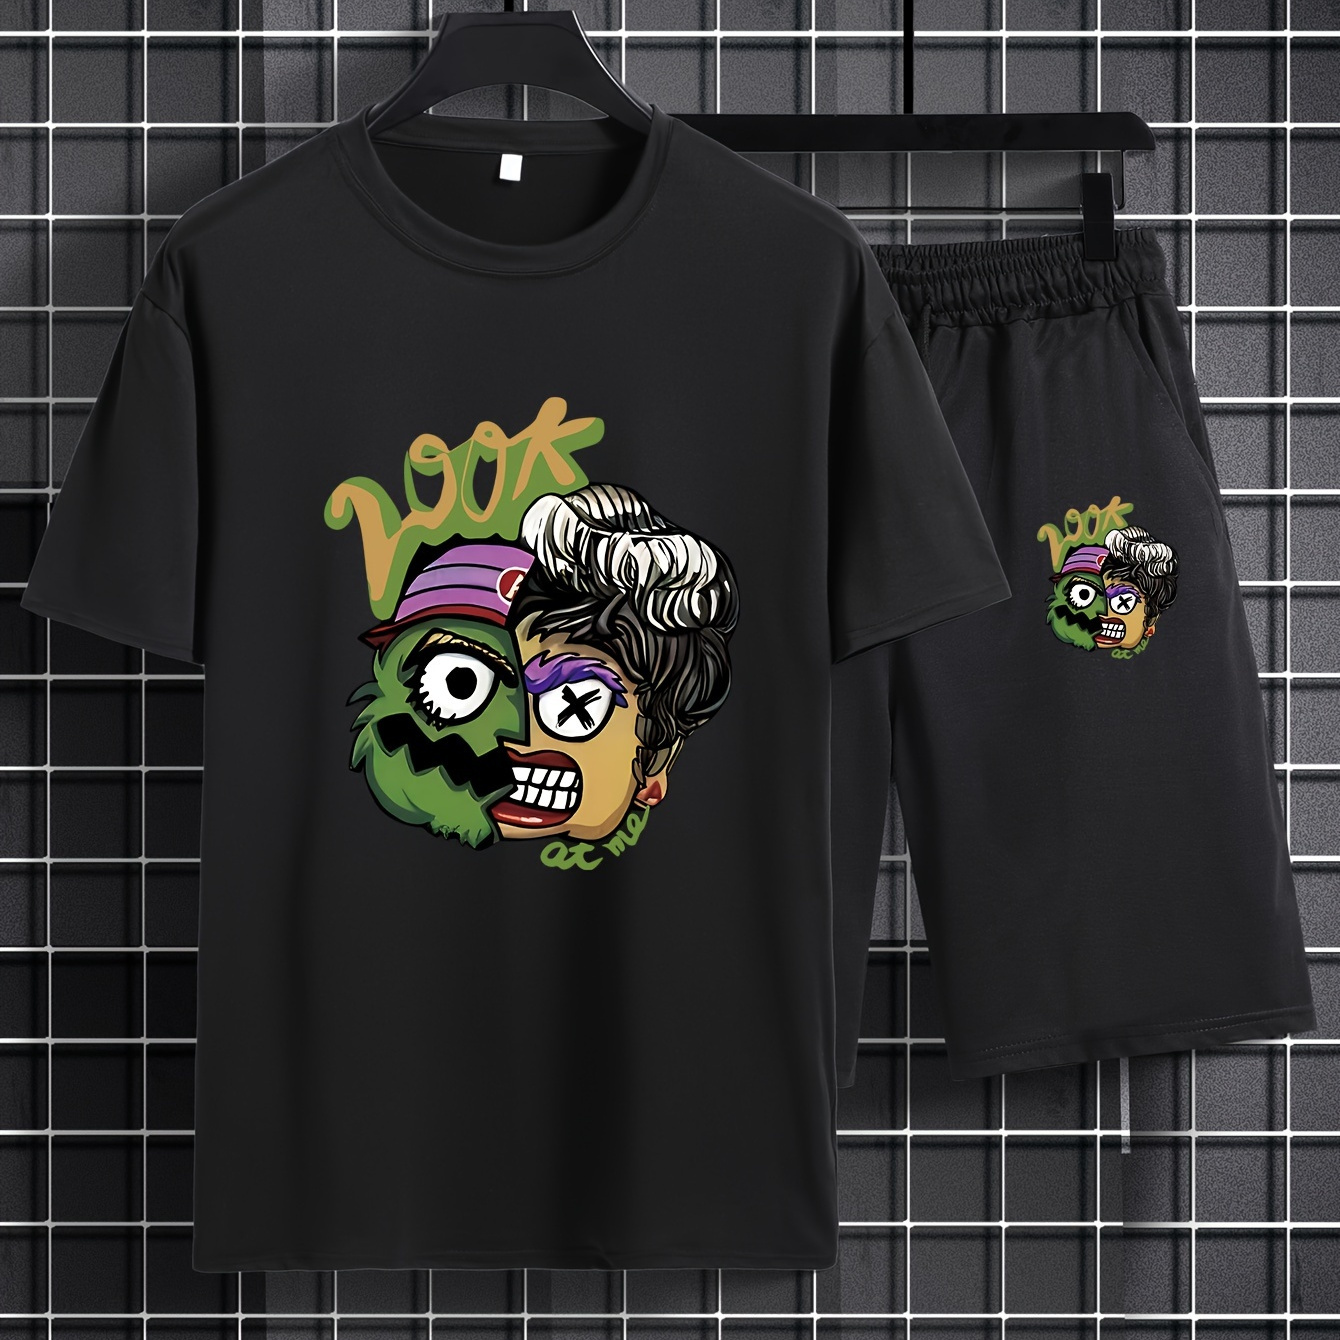 

Monster Print, Mens 2 Piece Outfits, Comfy Short Sleeve T-shirt And Casual Drawstring Shorts Set For Summer, Men's Clothing